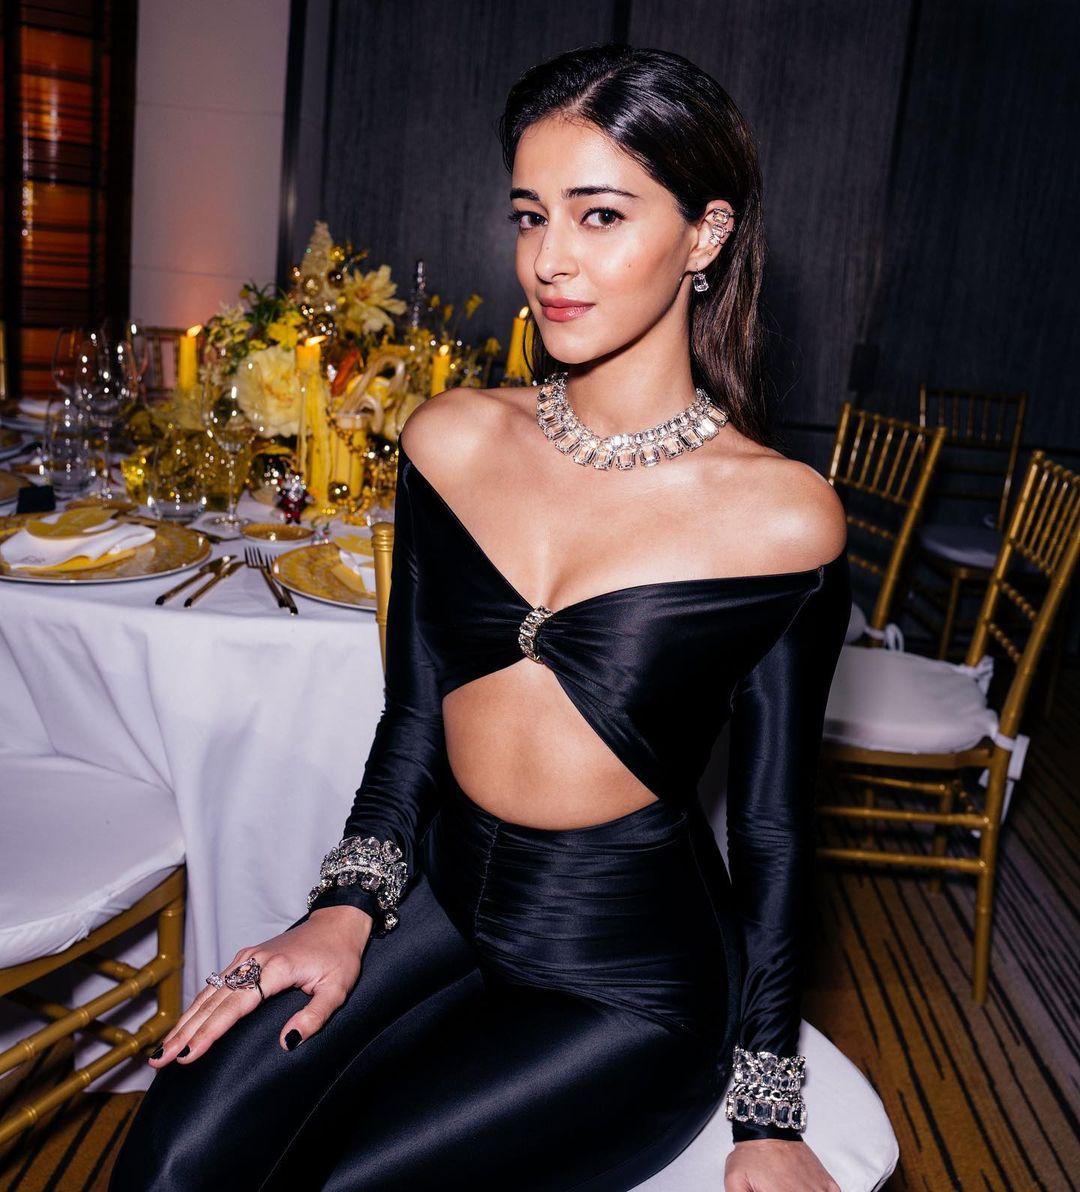 Ananya Panday's luxury cocktail outfit is something worth admiring. Just check out her appearance at the Swarovski dinner in NYC for some fashion inspiration. She rocked a long, black cut-out leotard adorned with lots of shiny jewelry. 